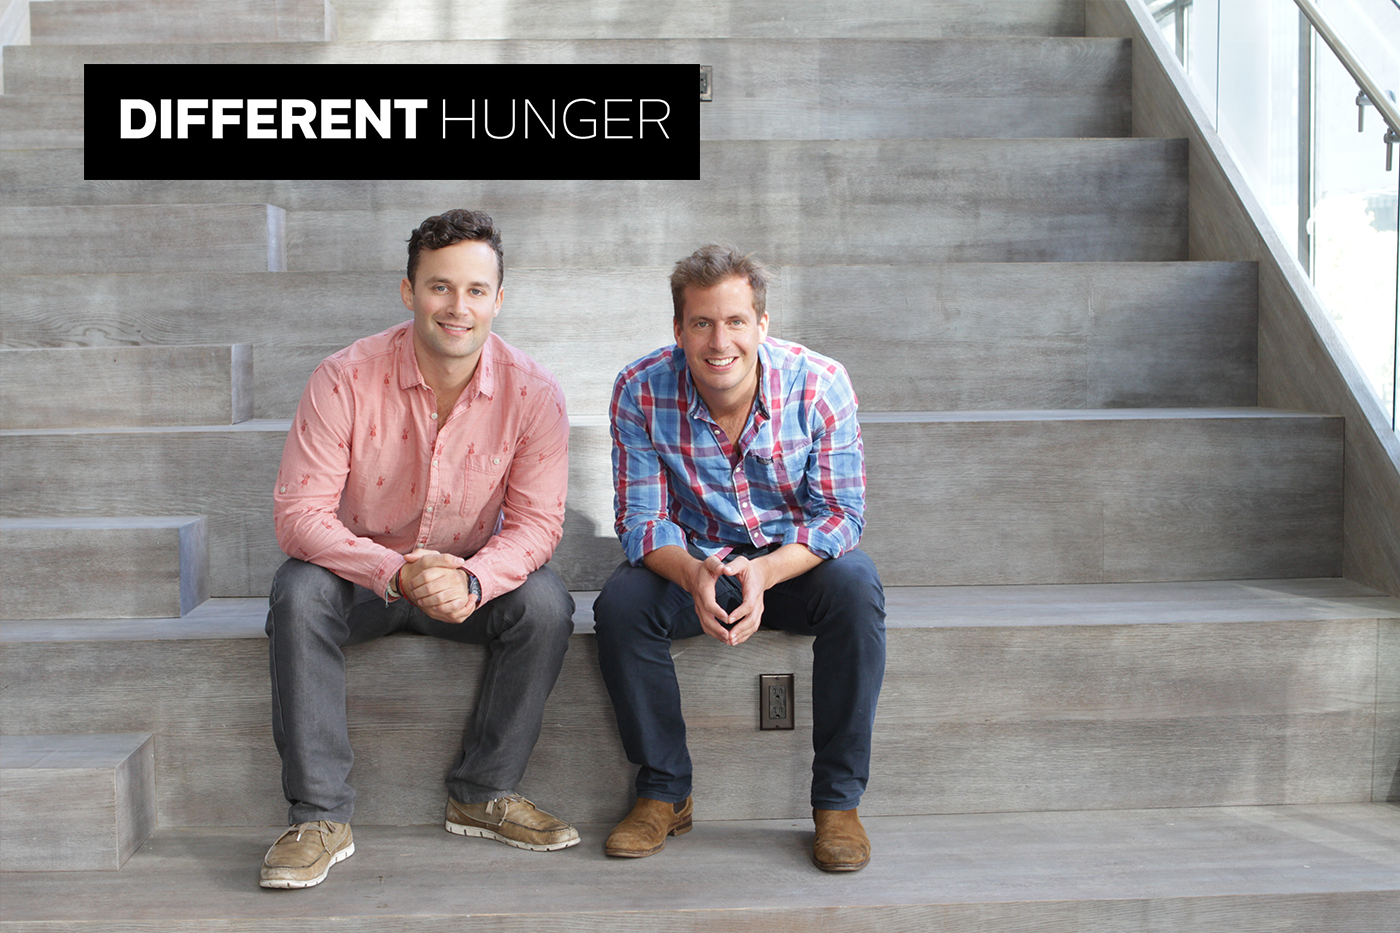 Different Hunger founders sat on steps